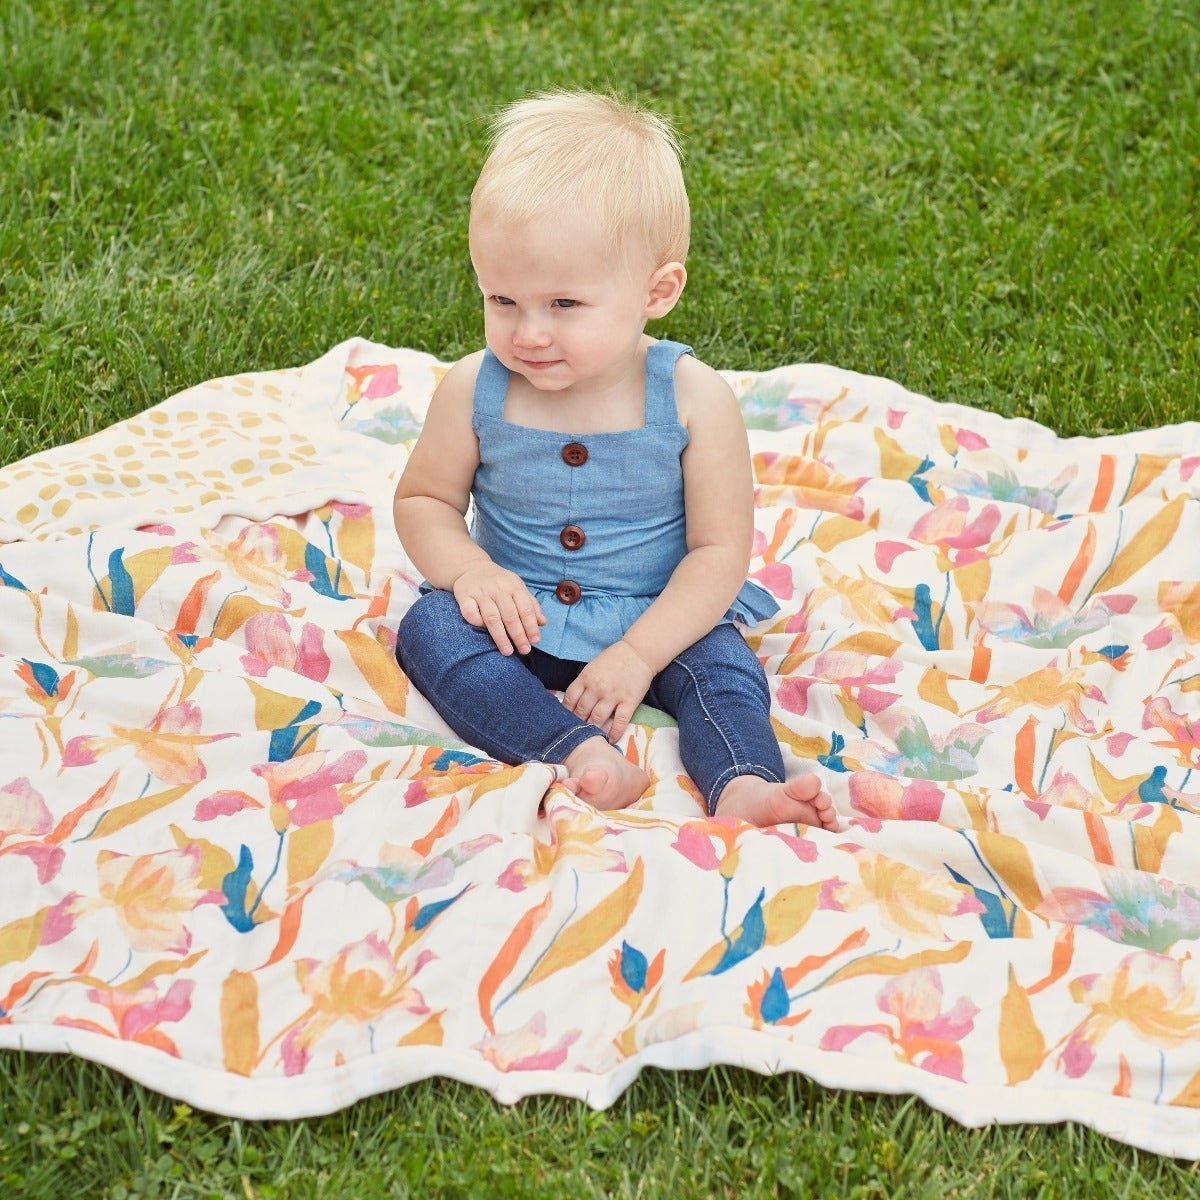 Aden & Anais Infant Boutique Silky Soft Swaddle Blankets, Marine Gardens, 3-pack - ANB Baby -$20 - $50